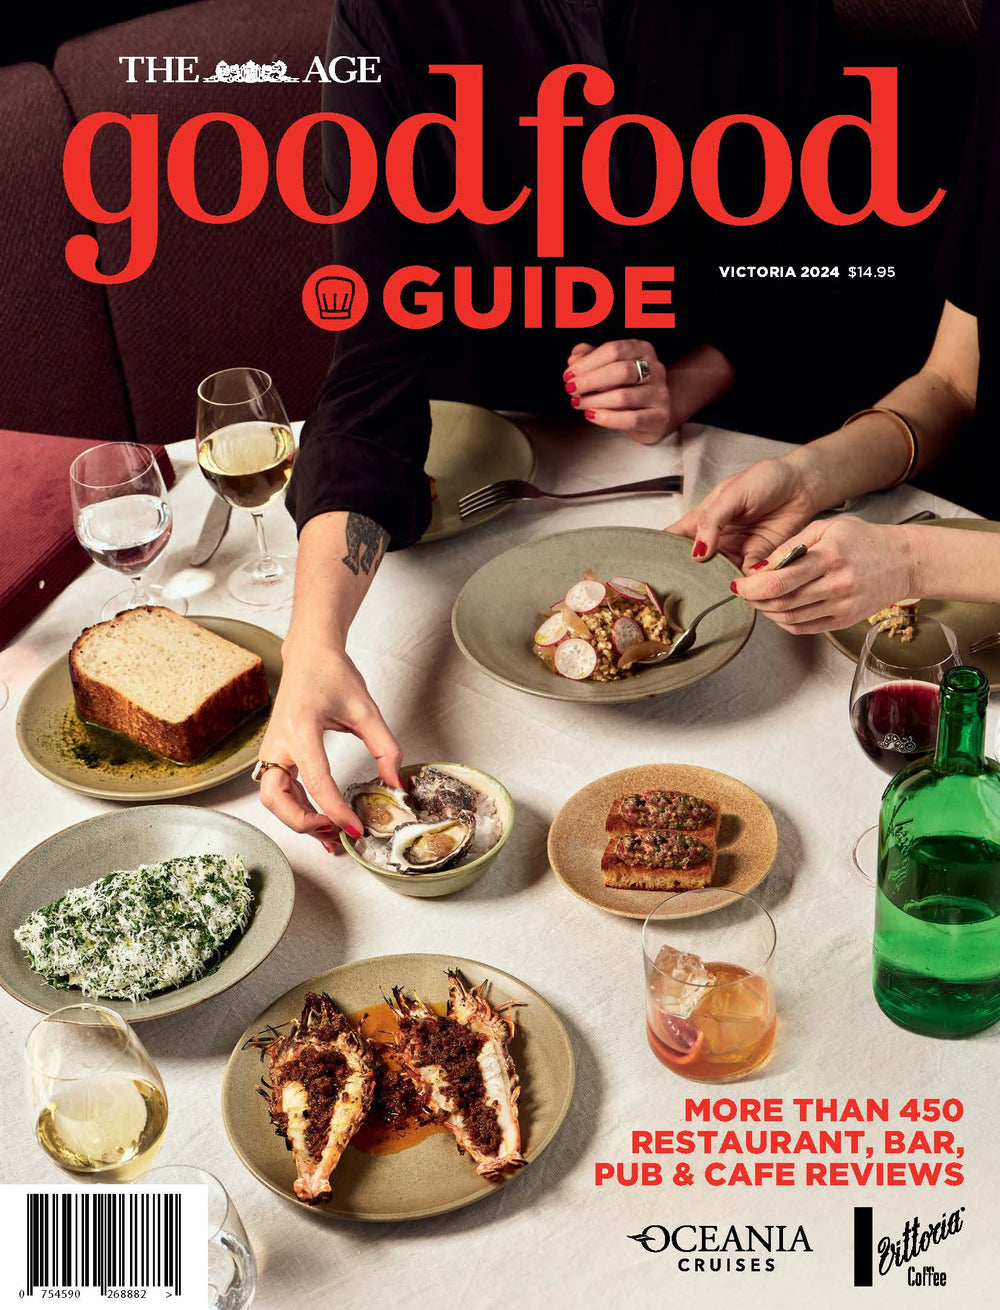 The VIC Good Food Guide 2024